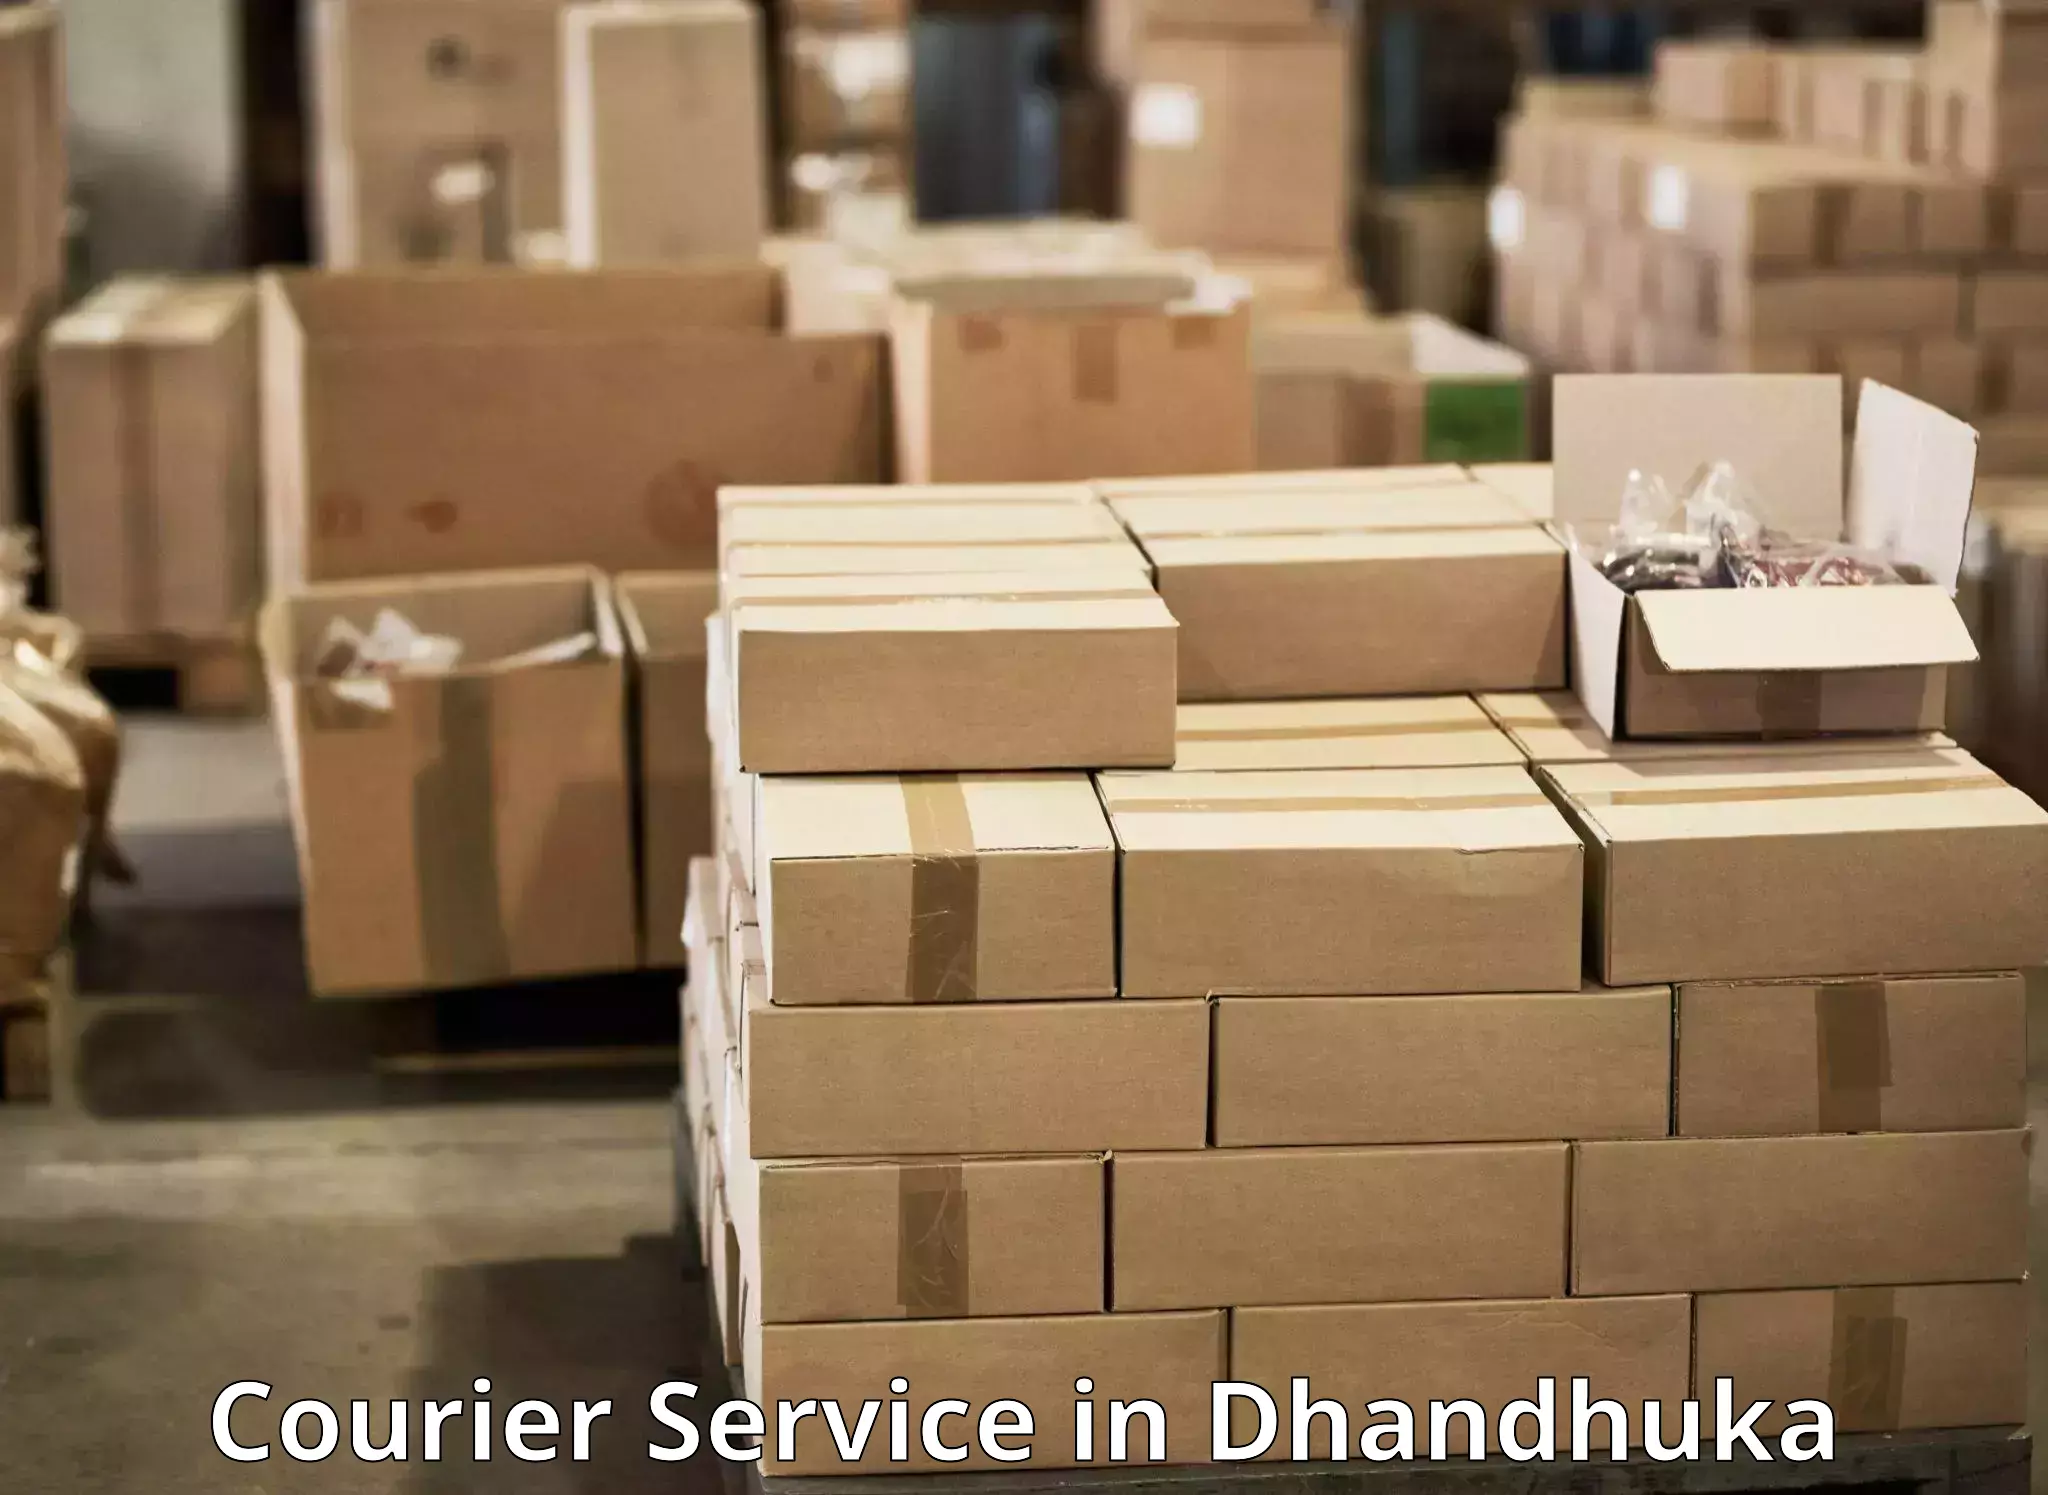 High-speed logistics services in Dhandhuka